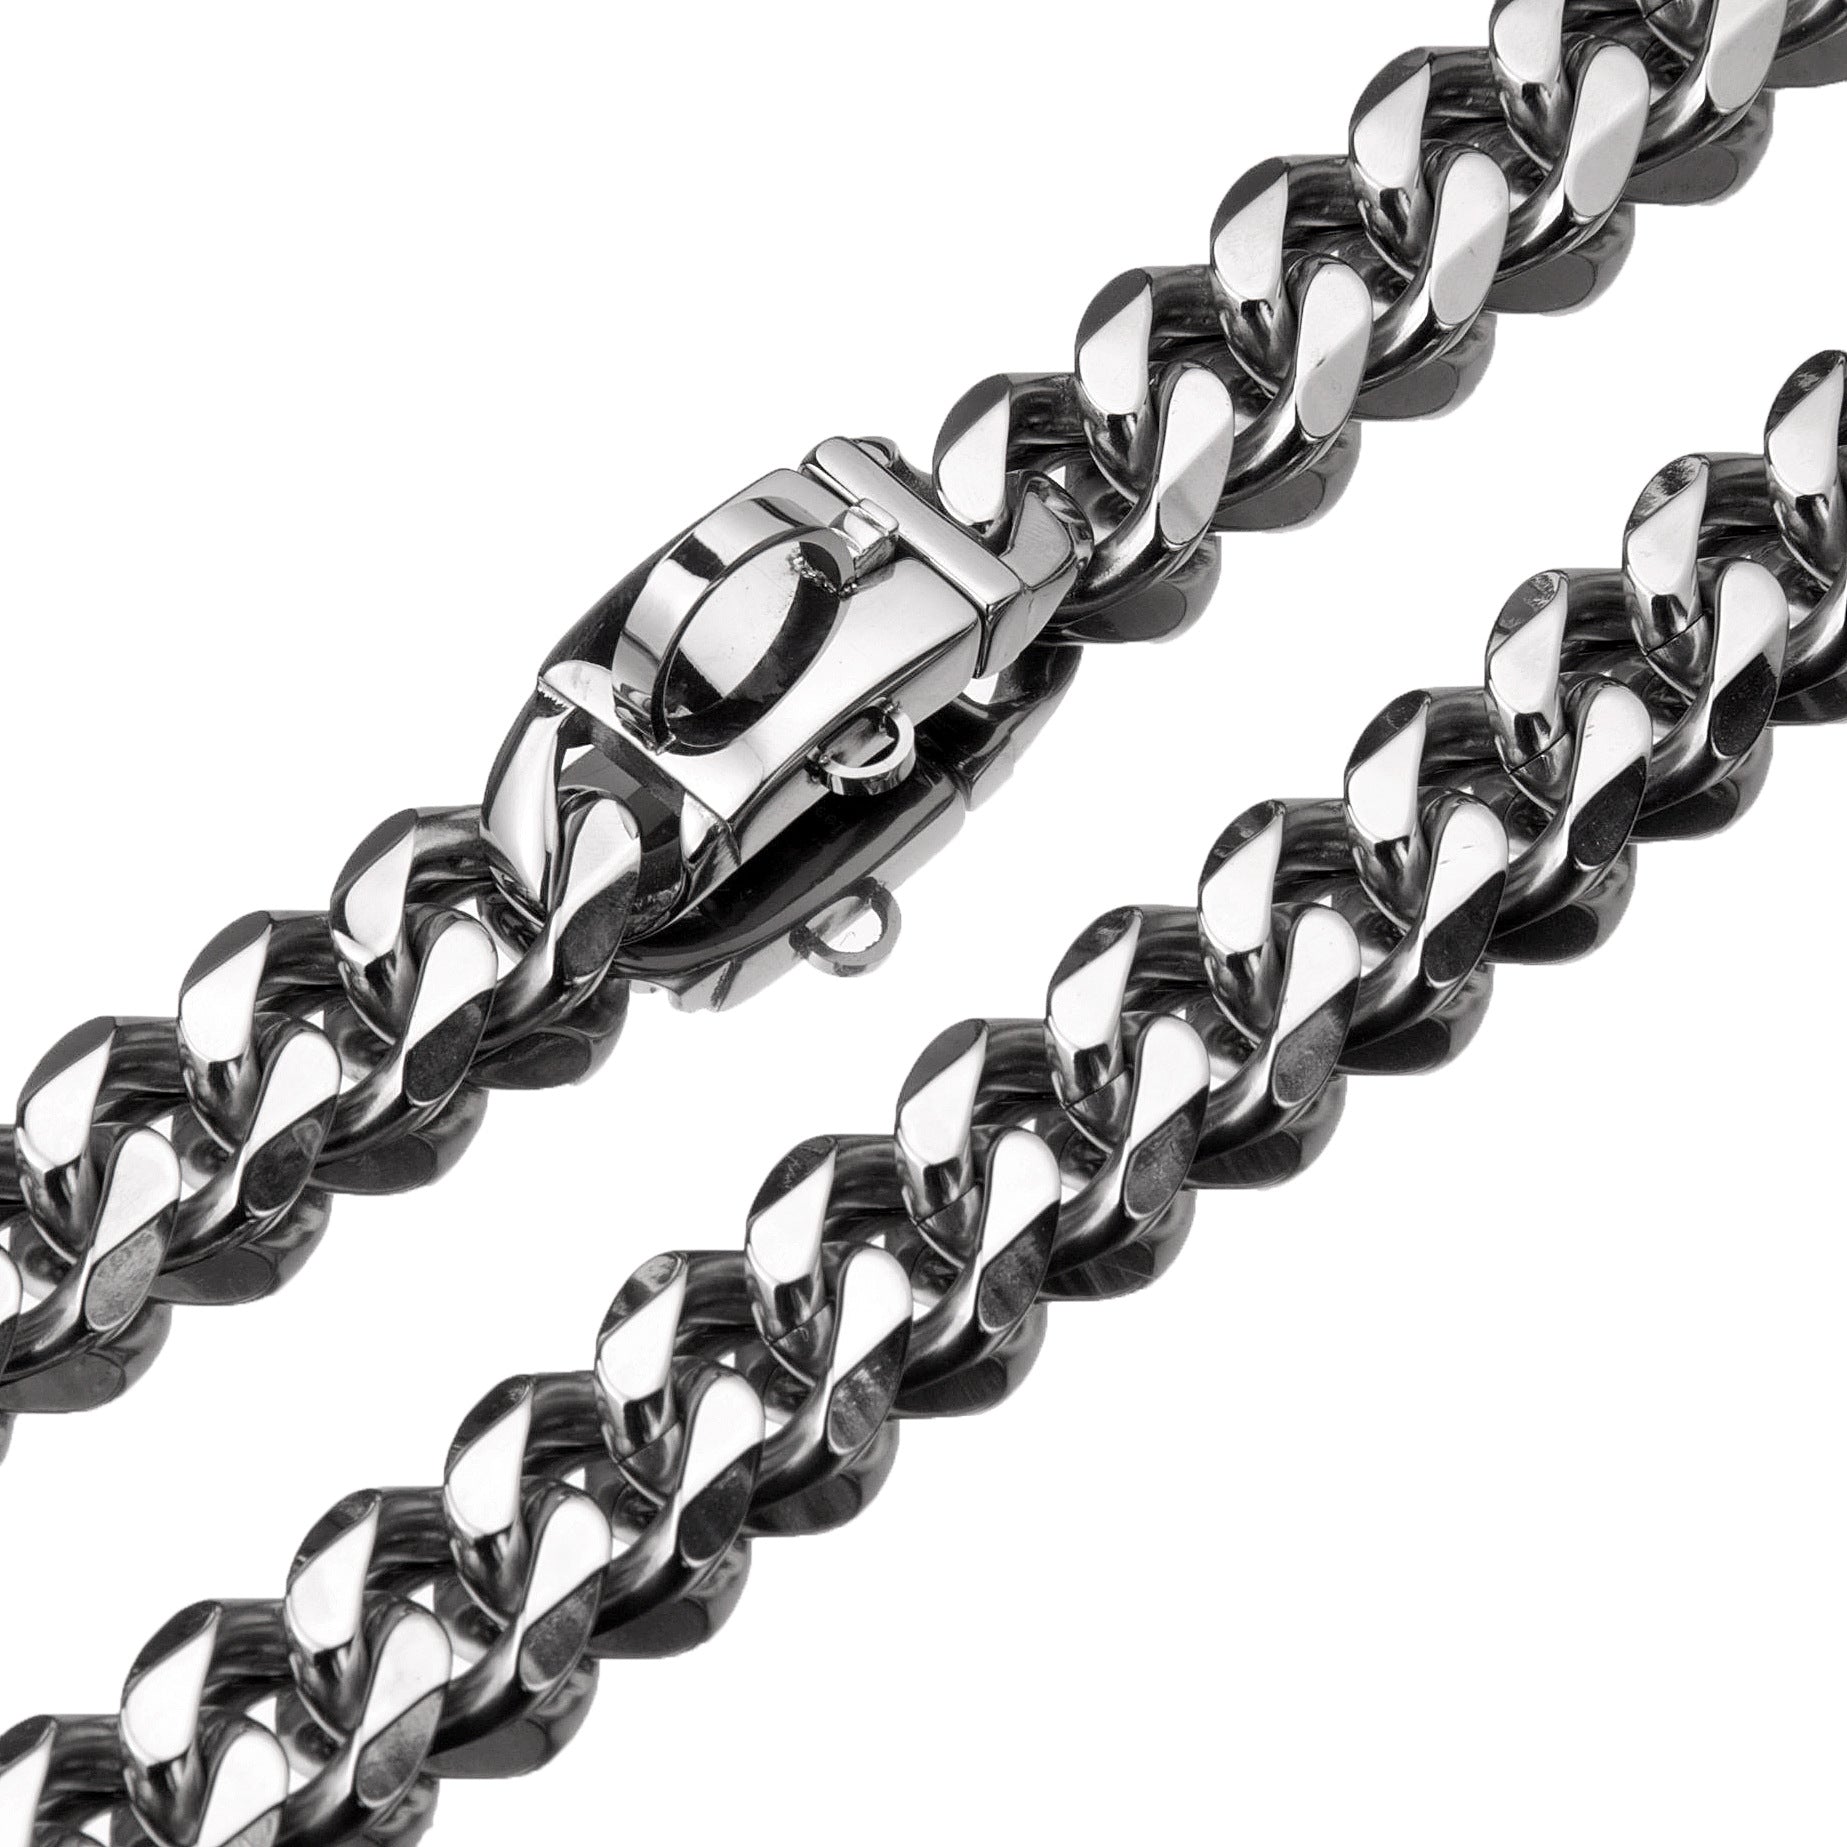 Stainless steel pet dog chain - For The Pupple